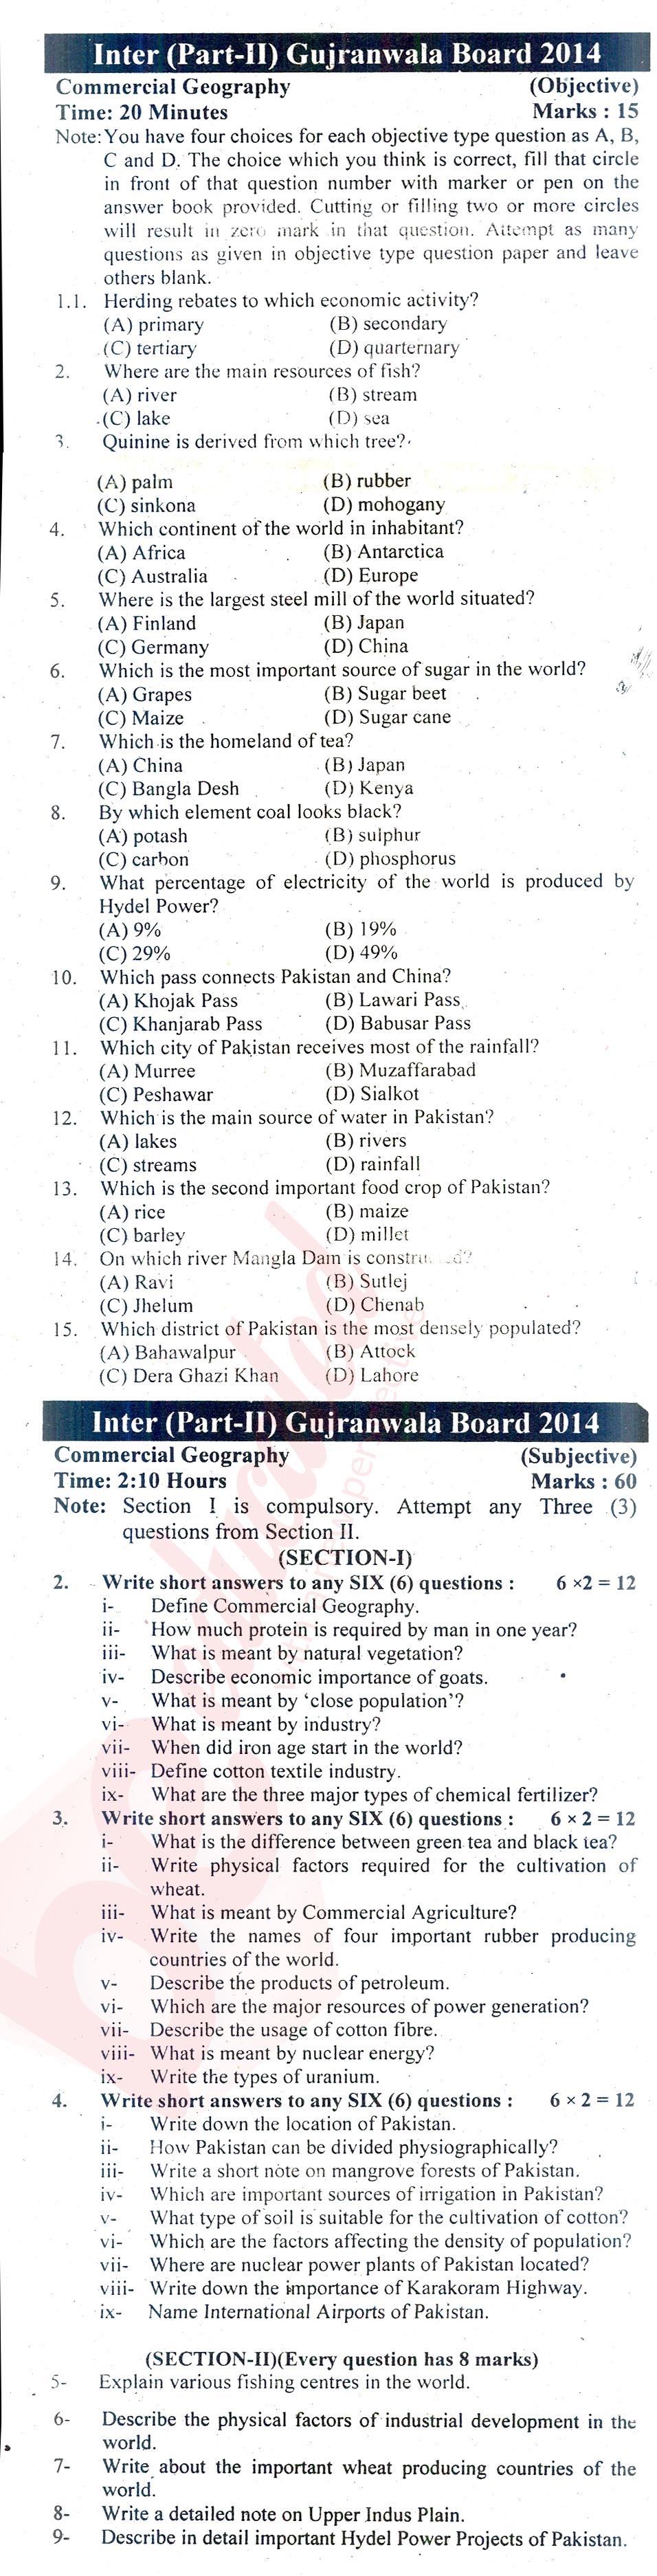 Commercial Geography ICOM Part 2 Past Paper Group 1 BISE Gujranwala 2014